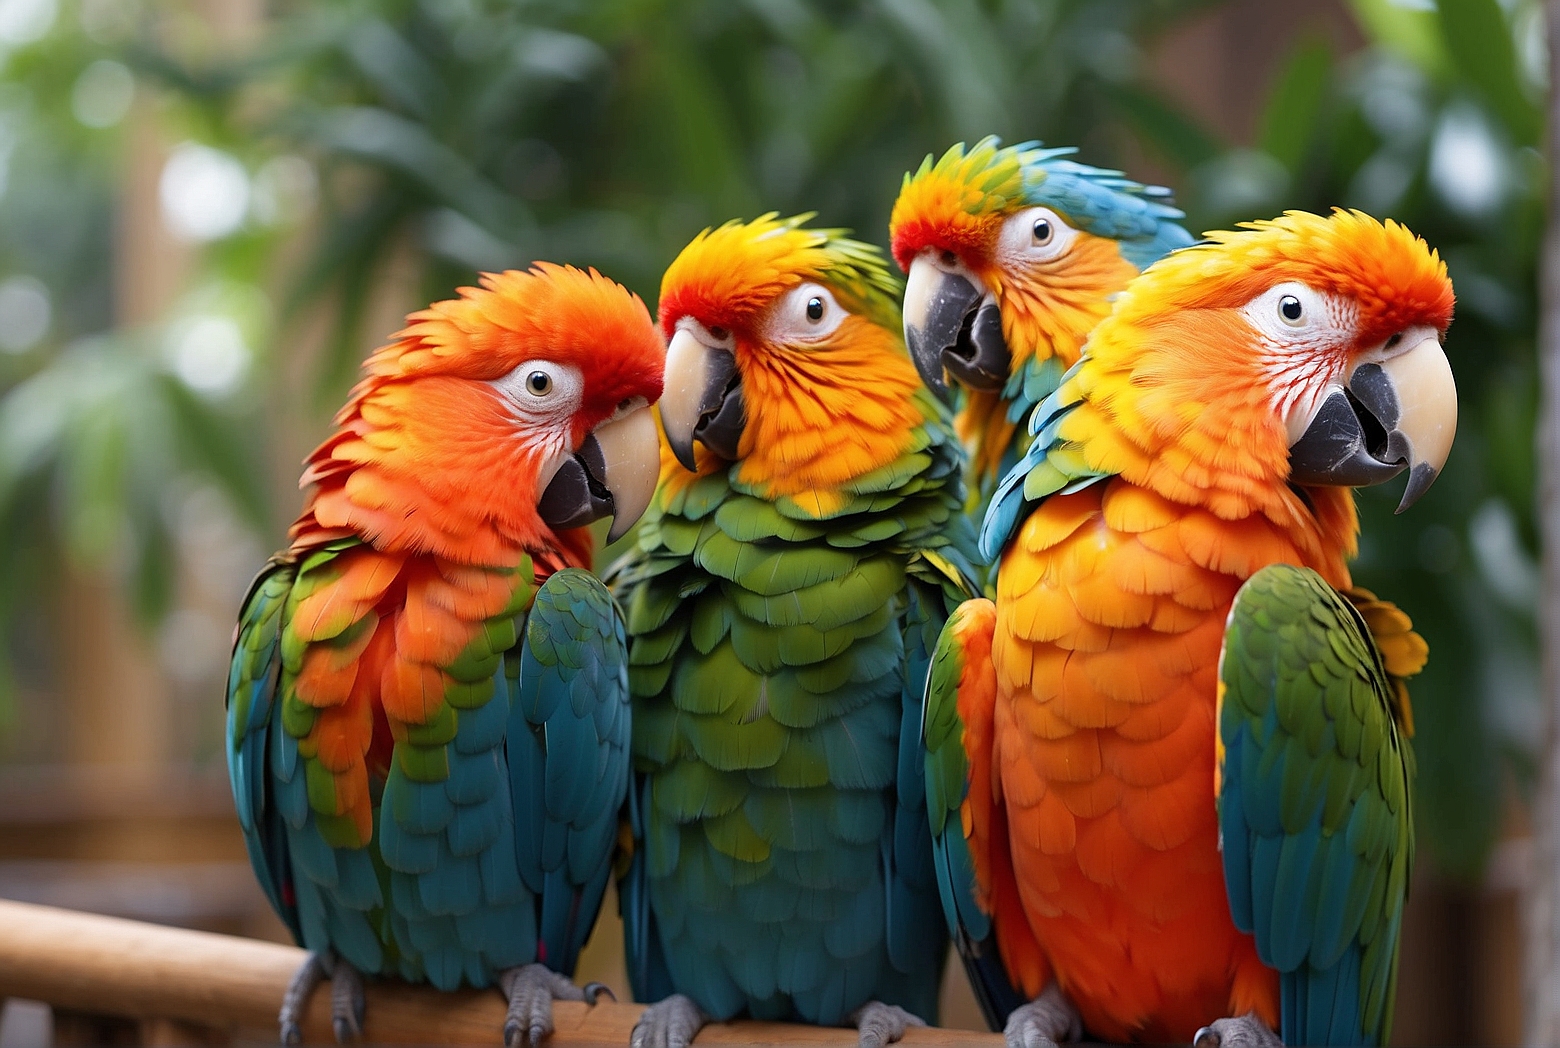 The Ultimate Guide to Choosing the Best Parrot as a Pet